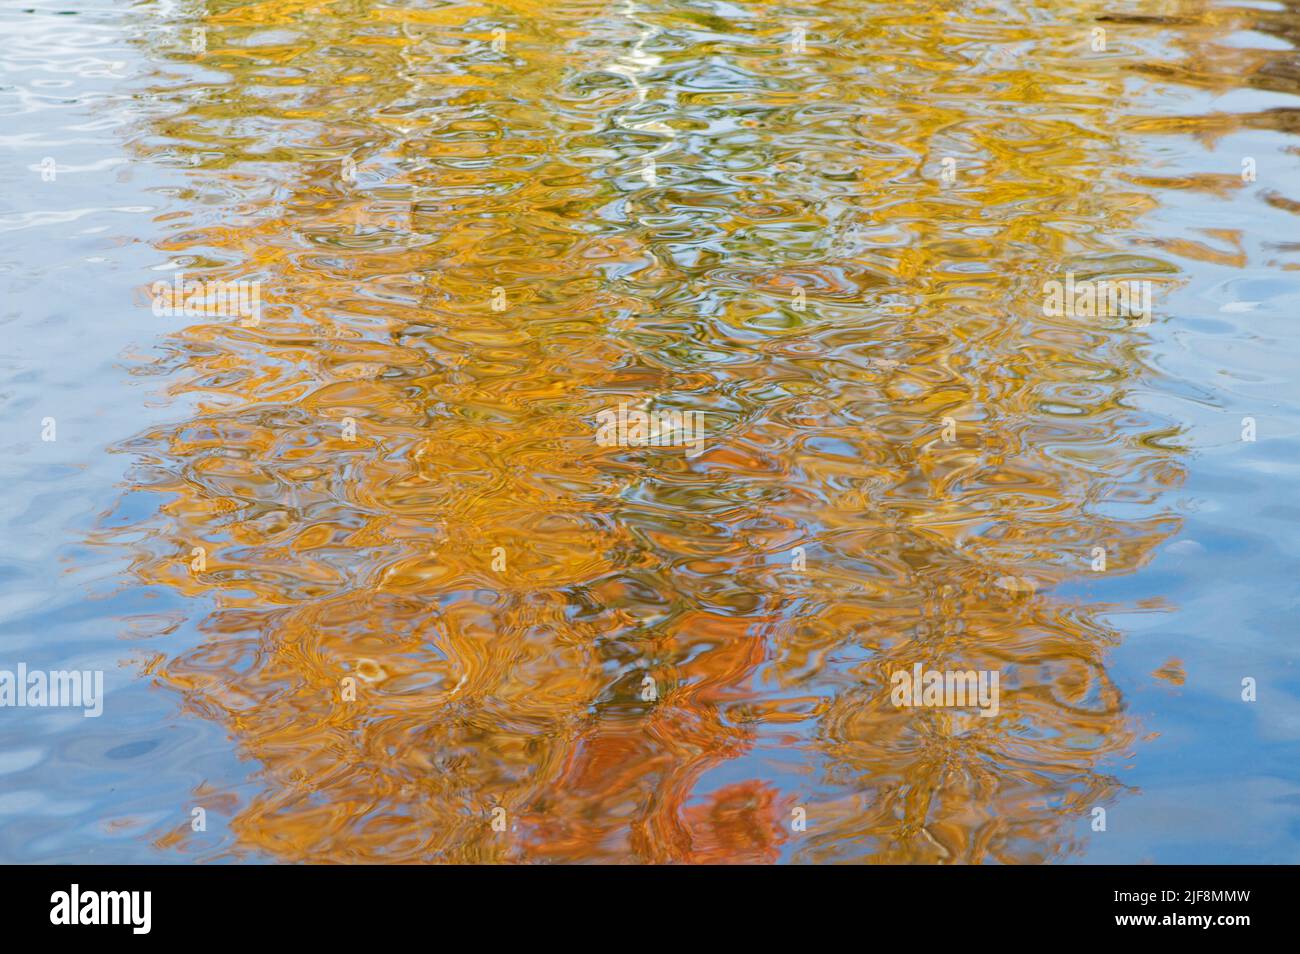 Yellow and orange Aspen tree reflections on the rippled blue water of a pond in Sun Valley, Idaho, creating a beautiful abstract image. Stock Photo